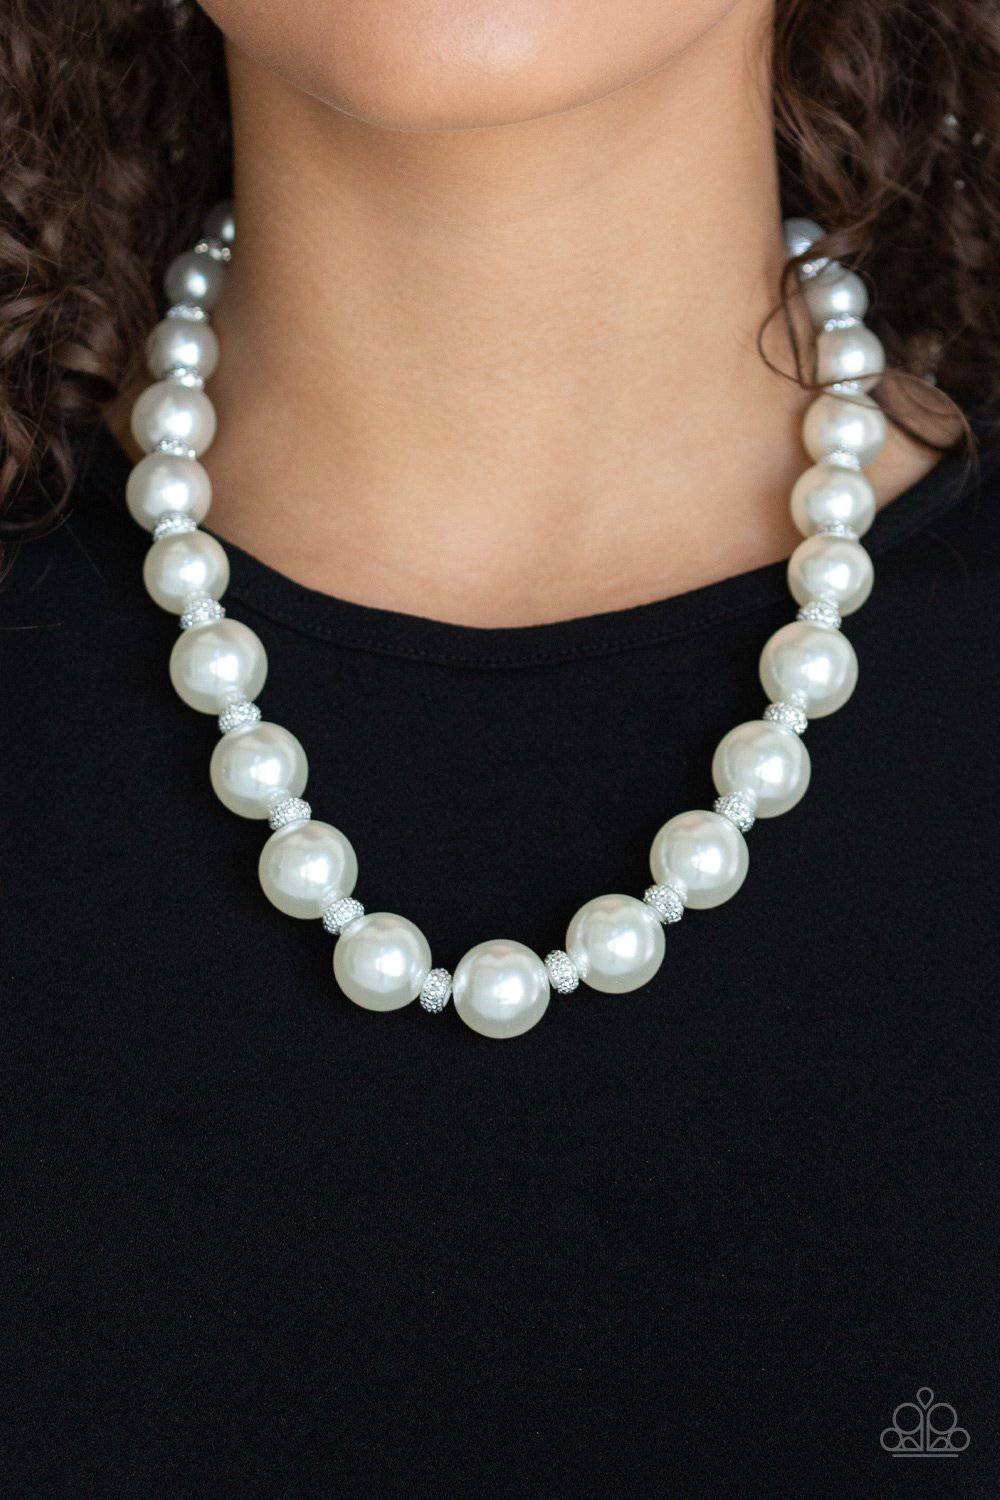 Uptown Heiress - White Pearl Necklace - Paparazzi Accessories - GlaMarous Titi Jewels